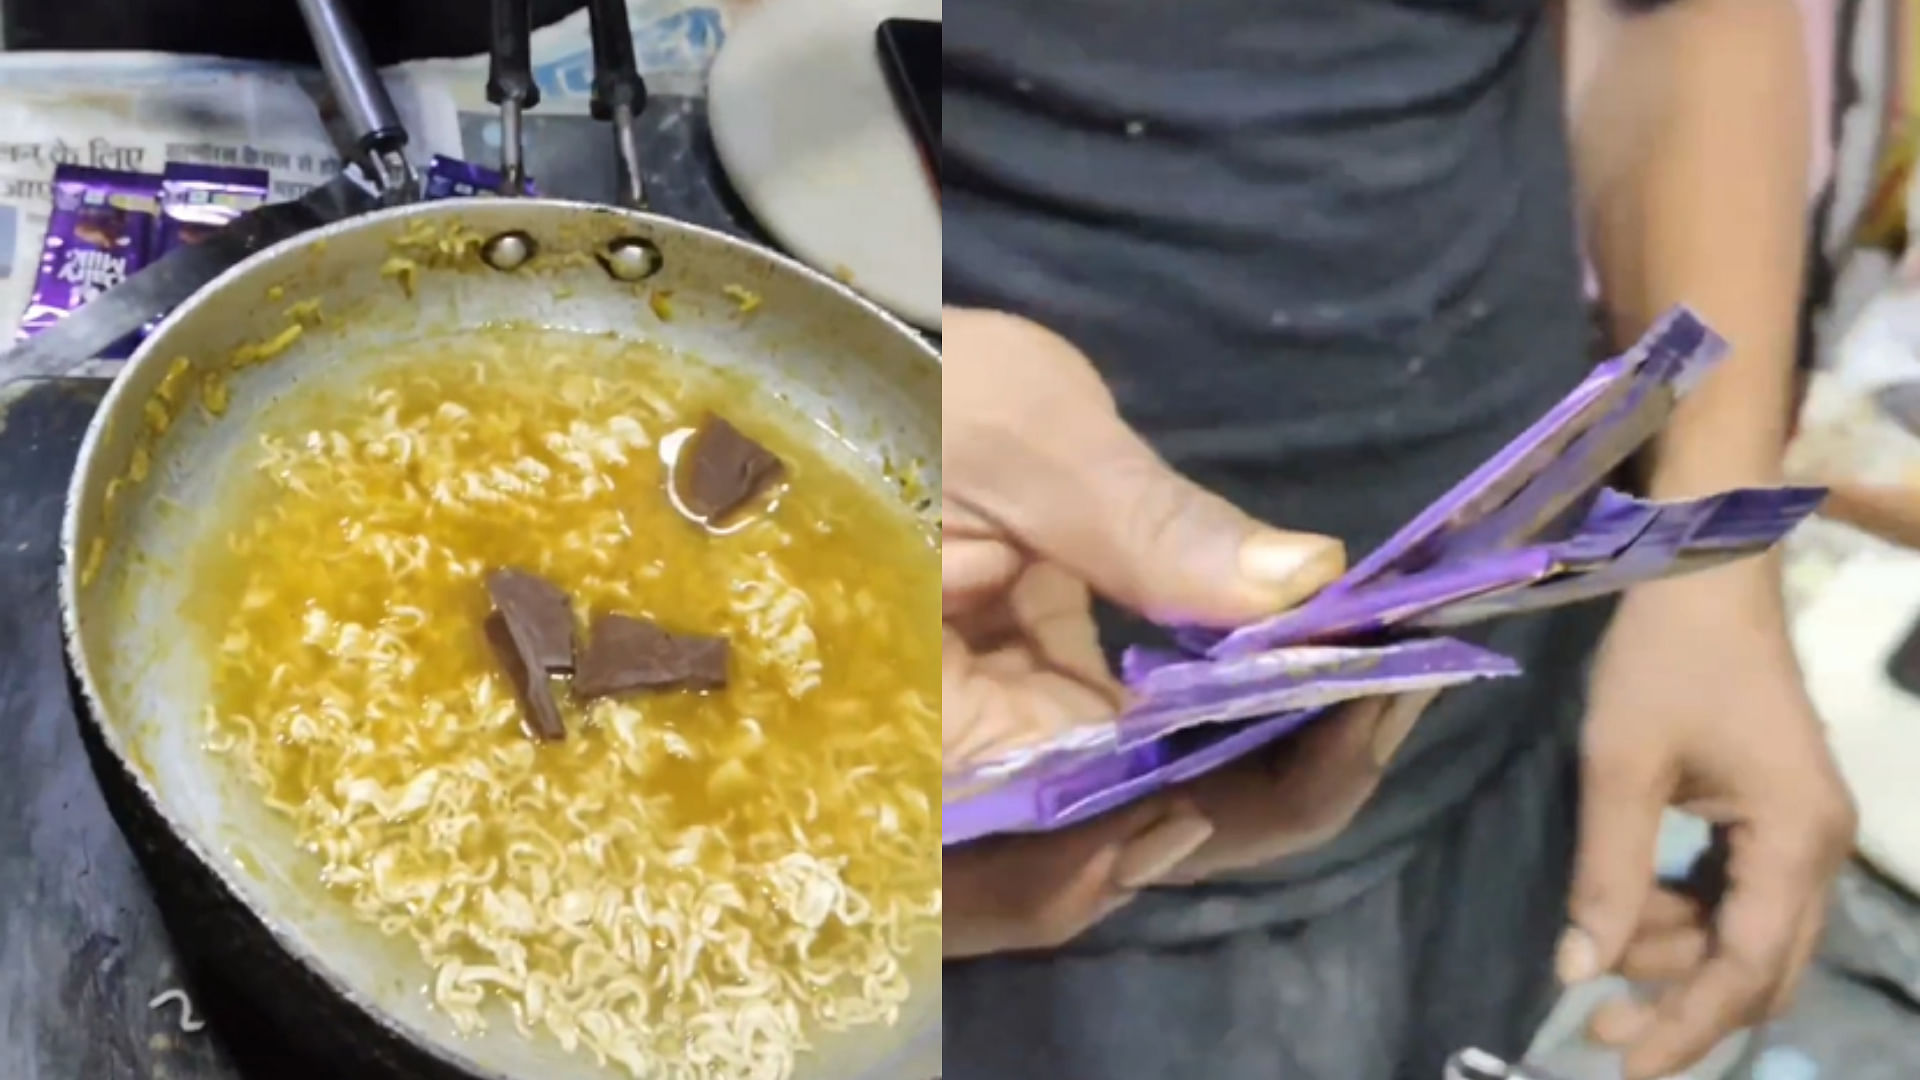 Chocolate maggie recipe bizzare food combination goes viral on internet